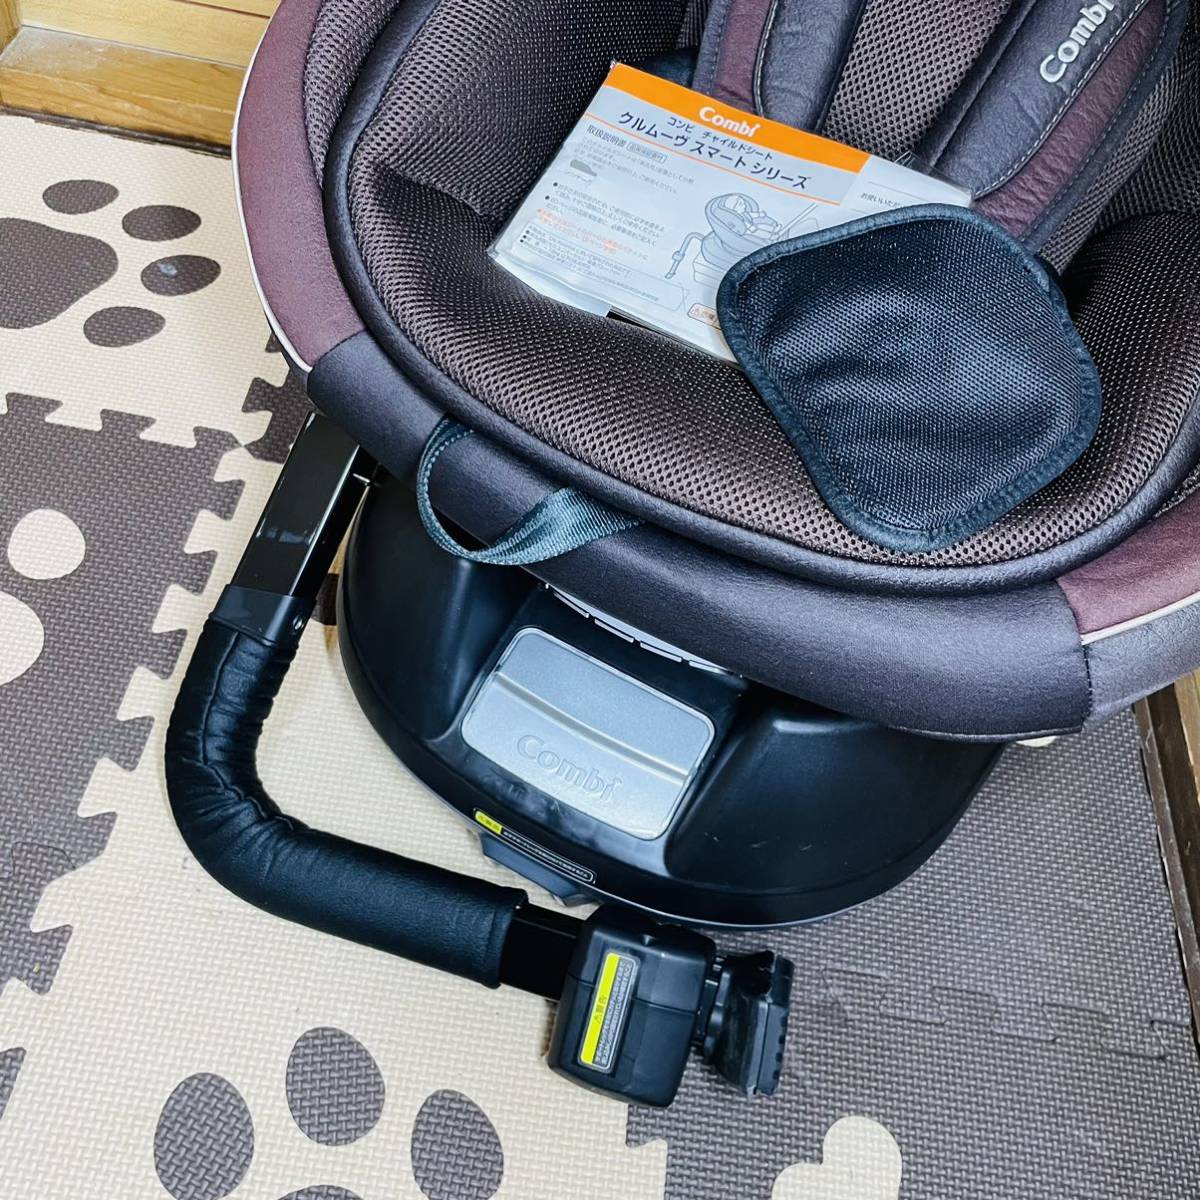  prompt decision use 4 months degree beautiful goods combination kru Move Smart eg shock accessory equipping child seat postage included 2500 jpy price cut combi